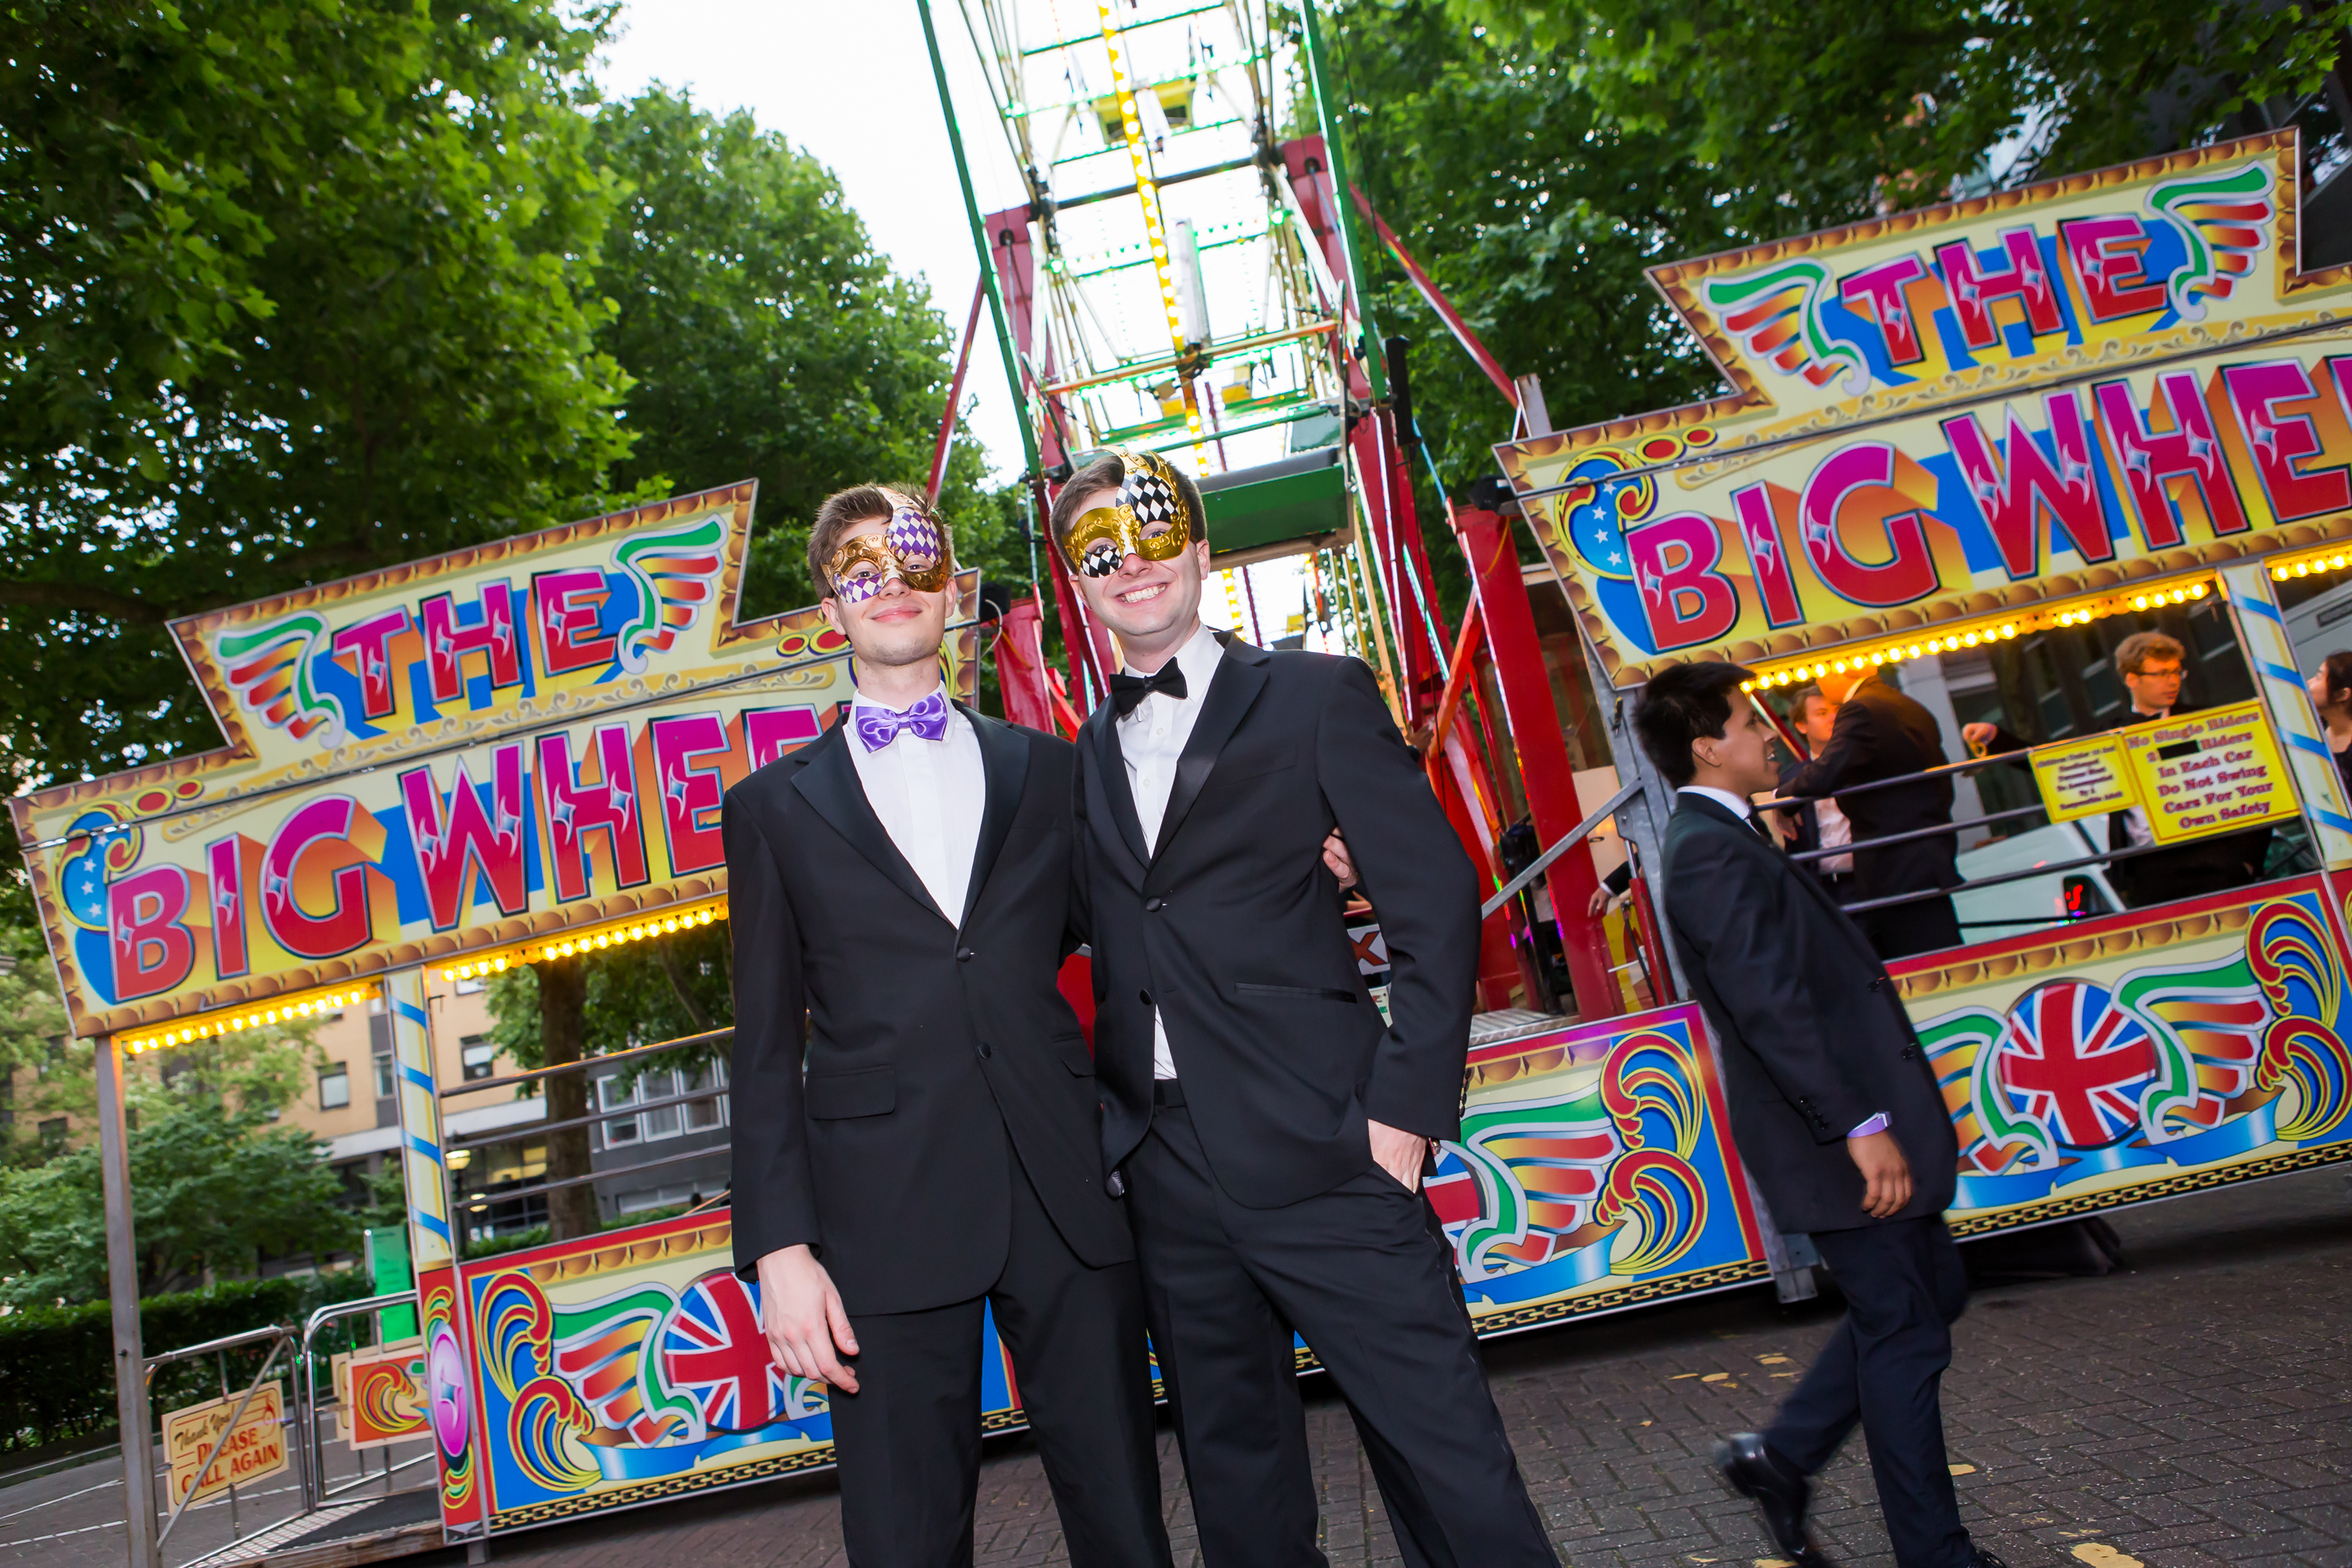 Two face-painted student posing in front of the big wheel fairground ride,